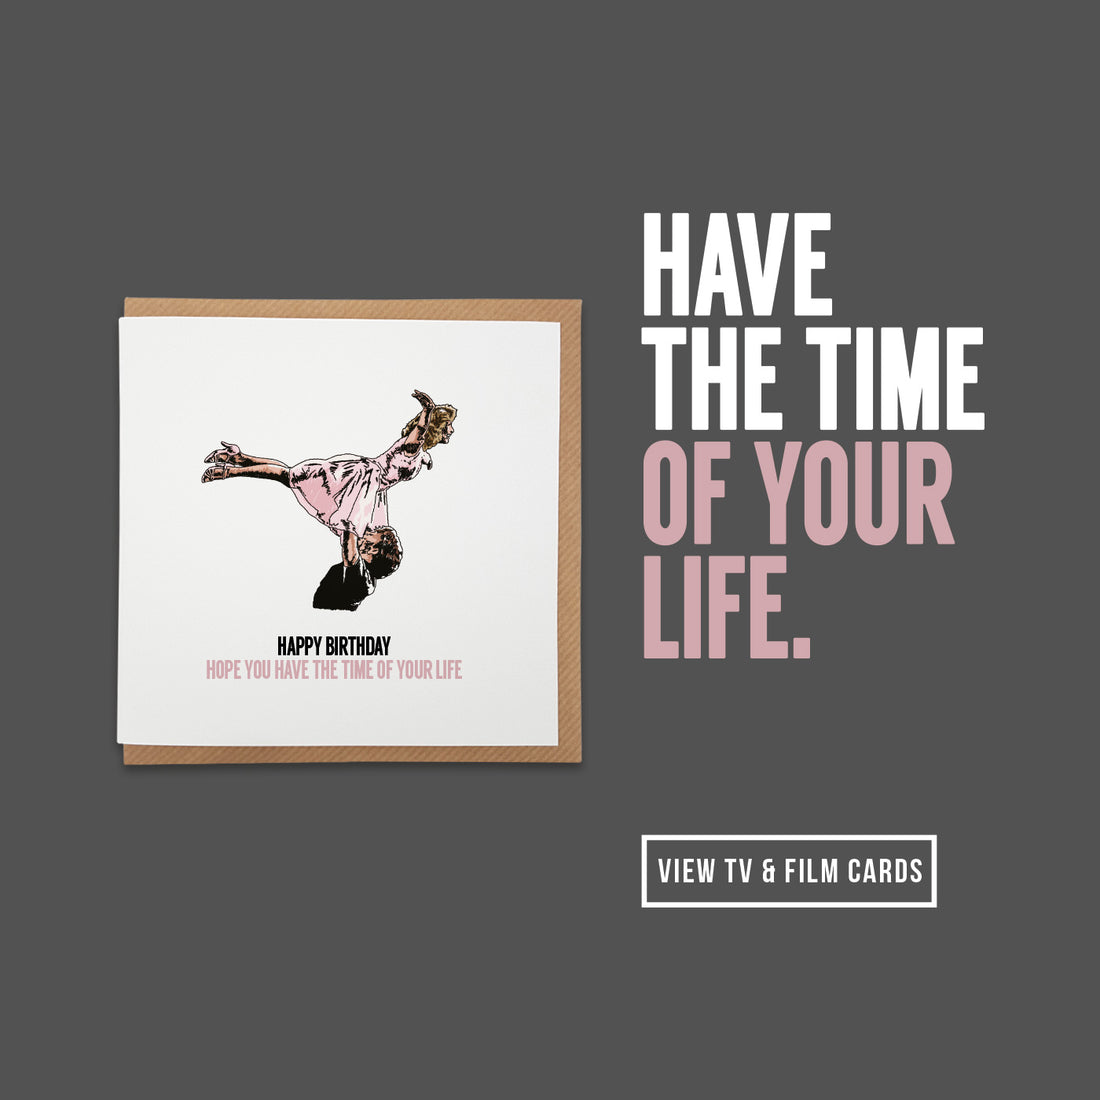 local lingo designed tv & film themed greetings cards such as dirty dancing. Iconic movie moments for birthdays